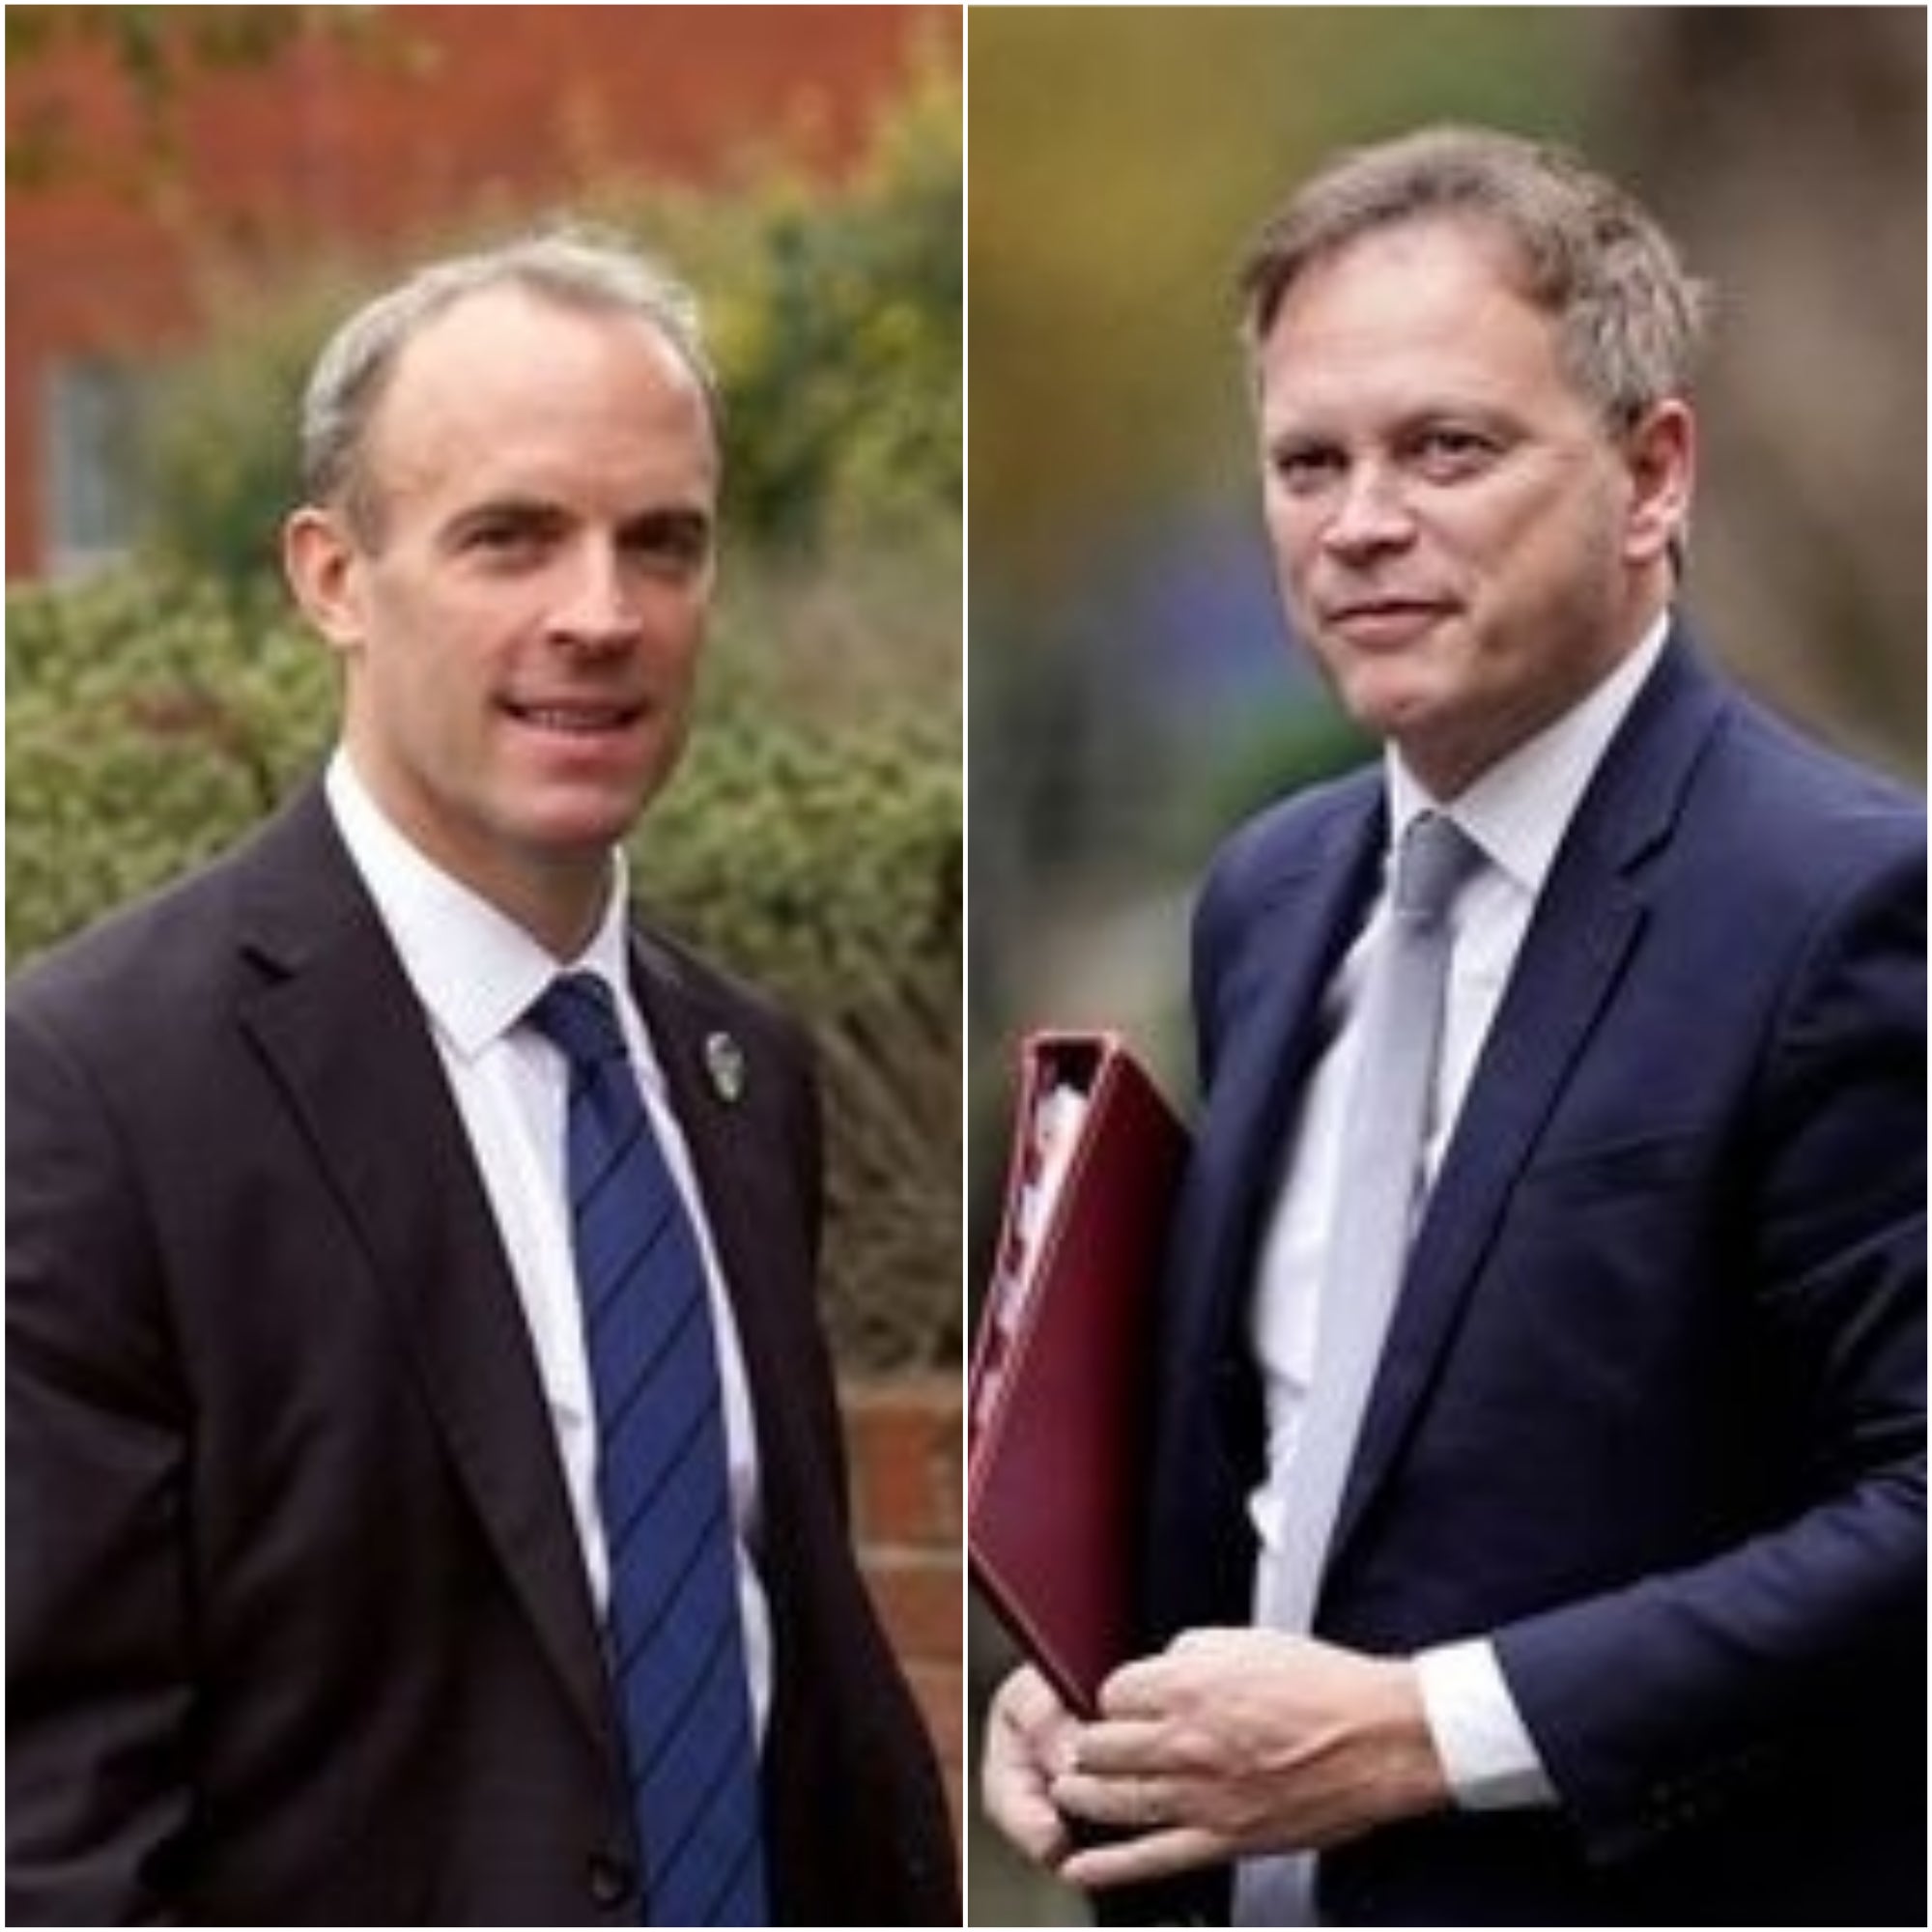 Cabinet ministers Dominic Raab and Grant Shapps are self-isolating after contact with Australian Deputy PM Barnaby Joyce who has tested positive for Covid-19 (PA)